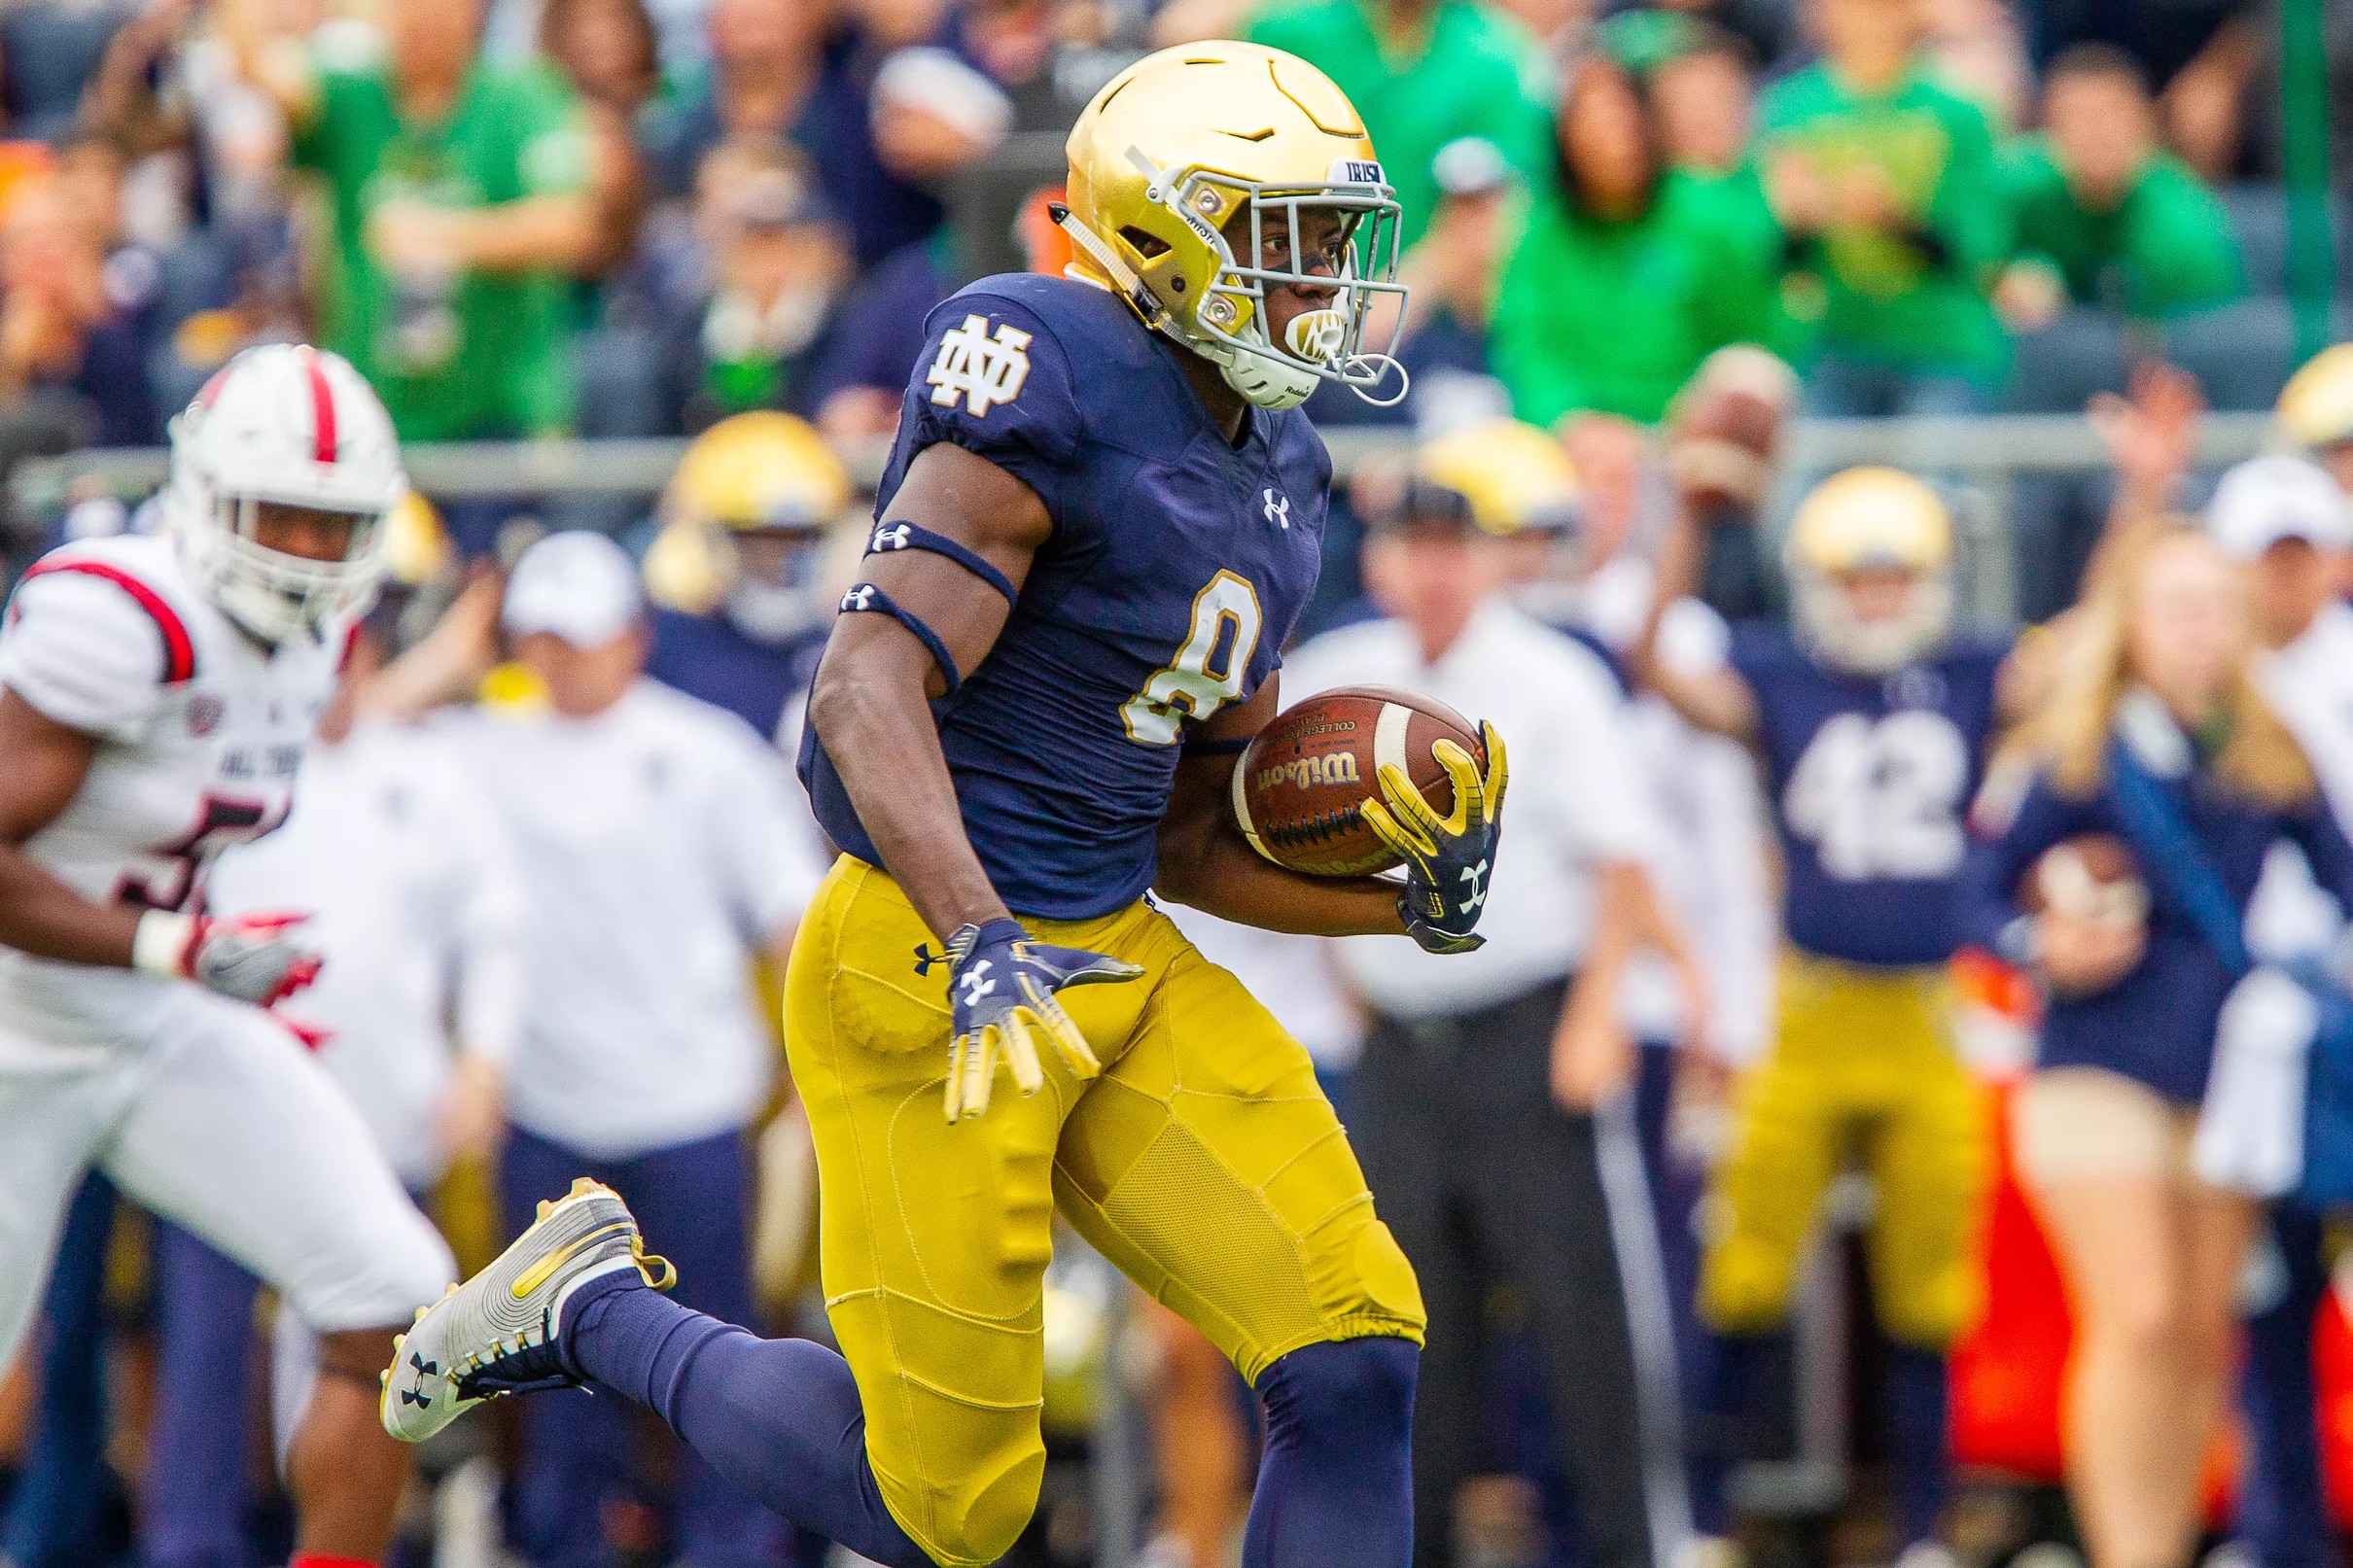 No One Was Prepared For Notre Dame’s 24-16 Win Over Ball State